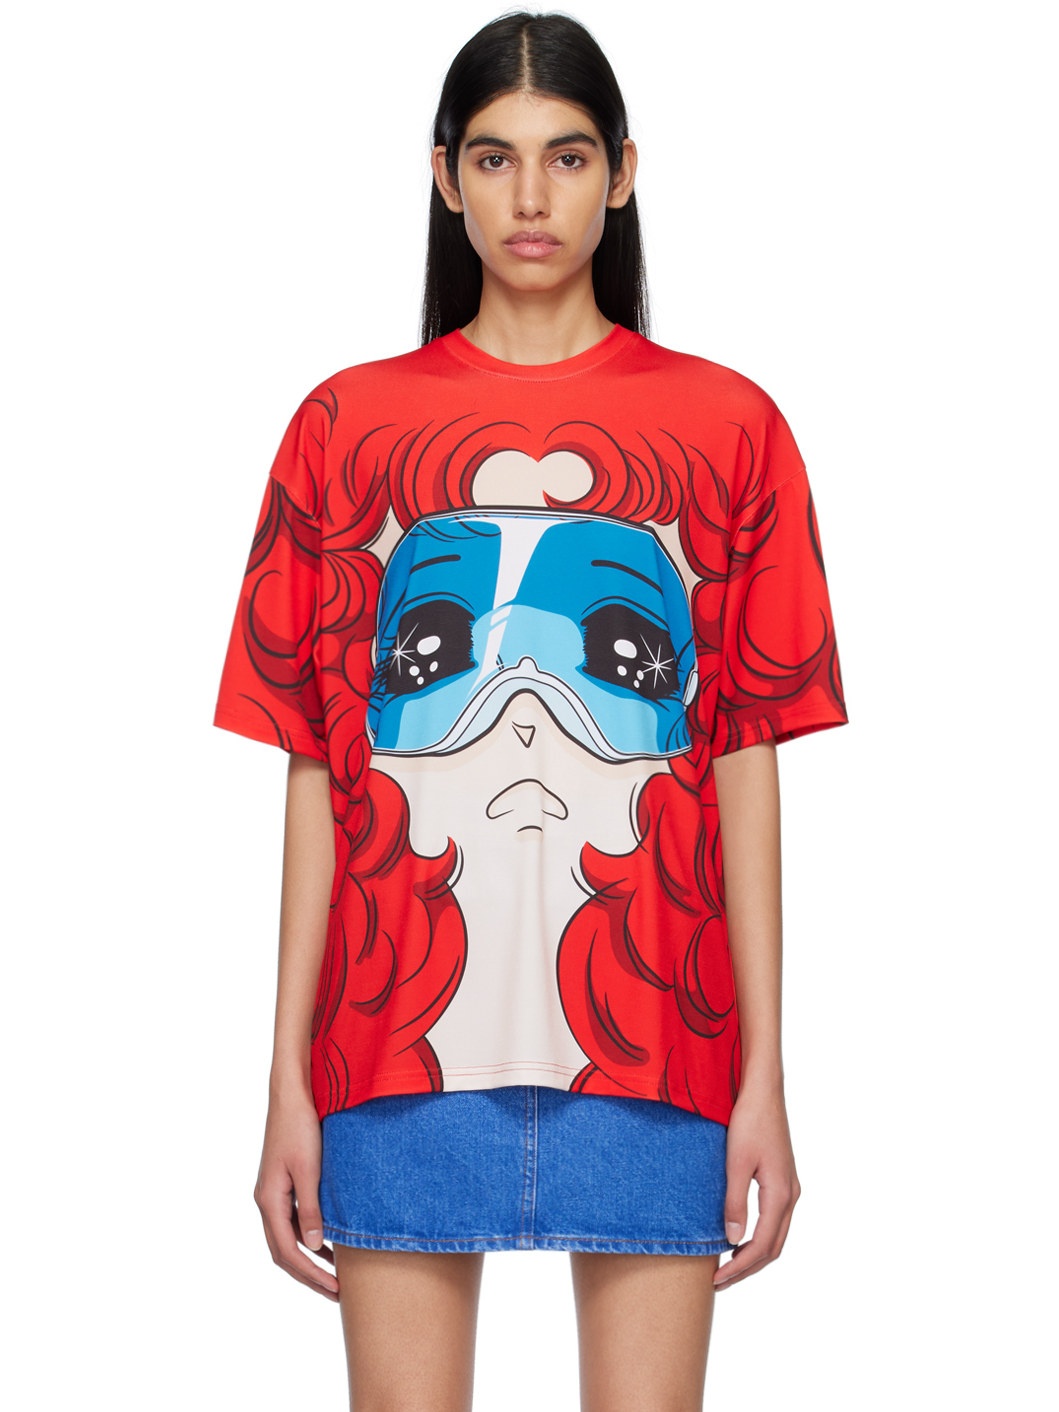 SSENSE Exclusive Red Goggle Girl T-Shirt - 1